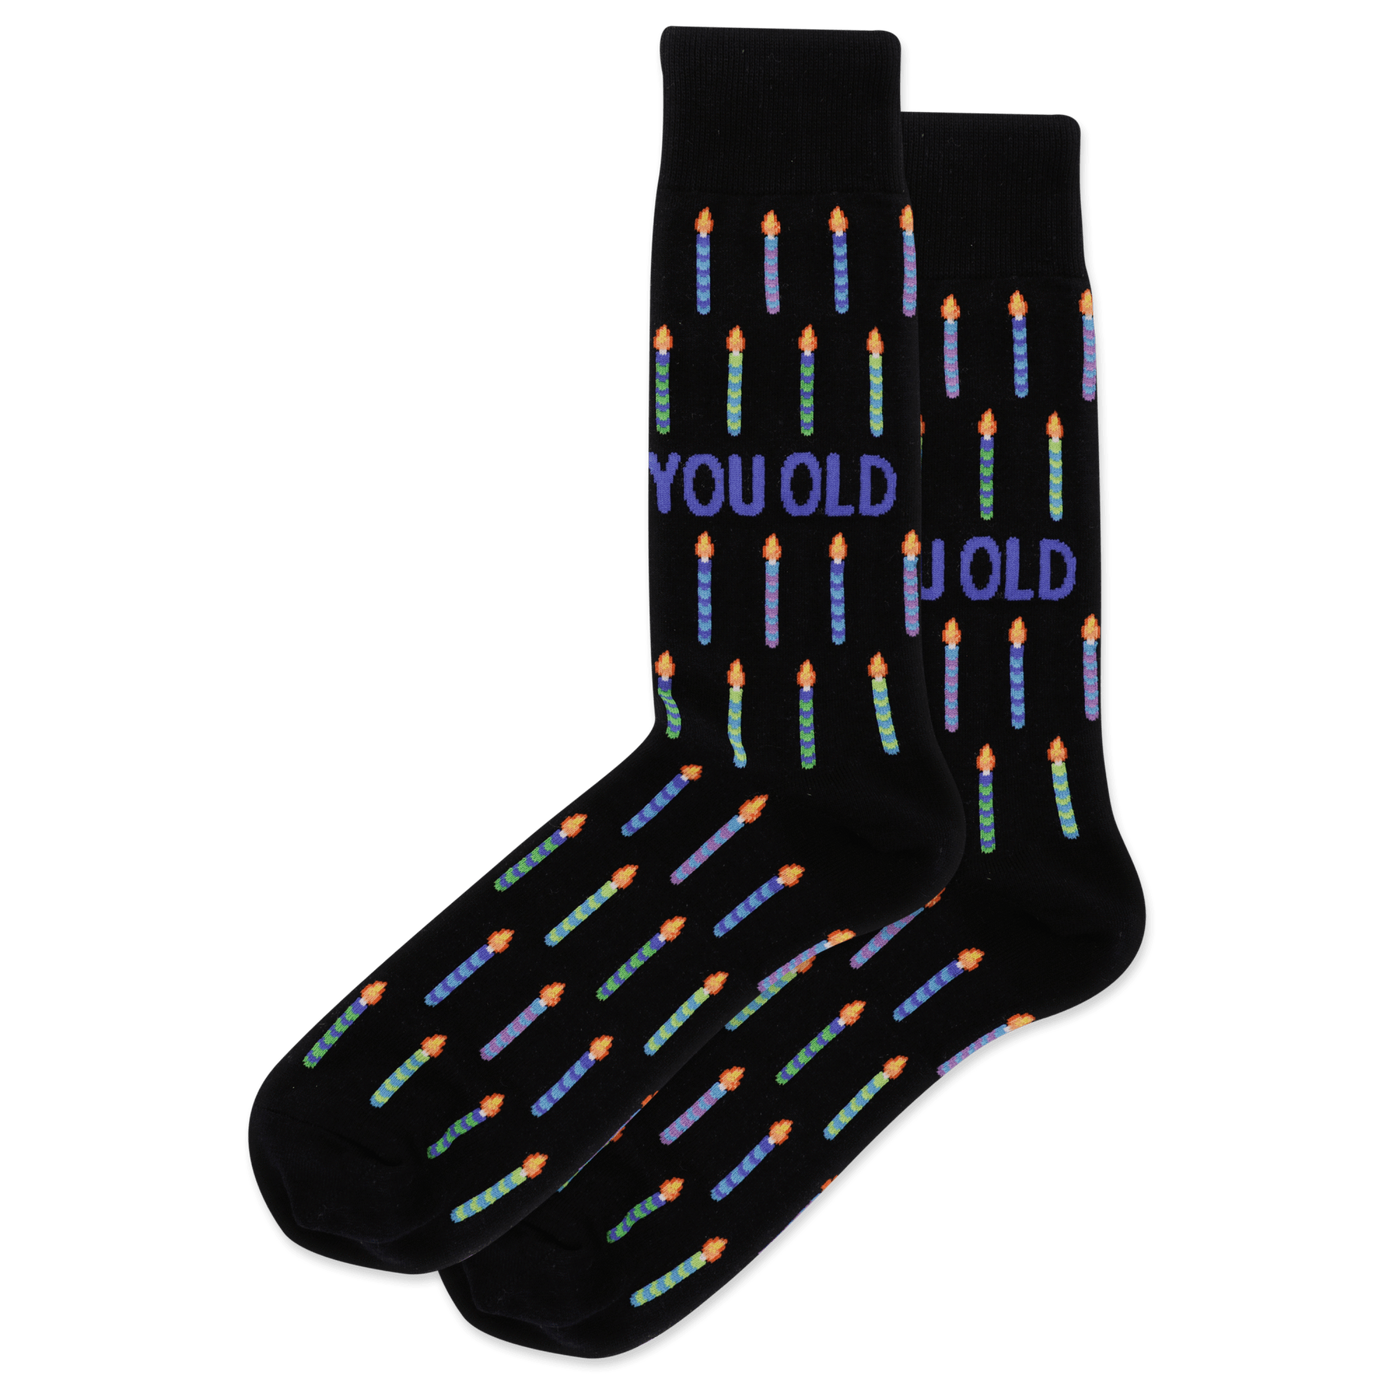 "You Old" Cotton Crew Socks by Hot Sox